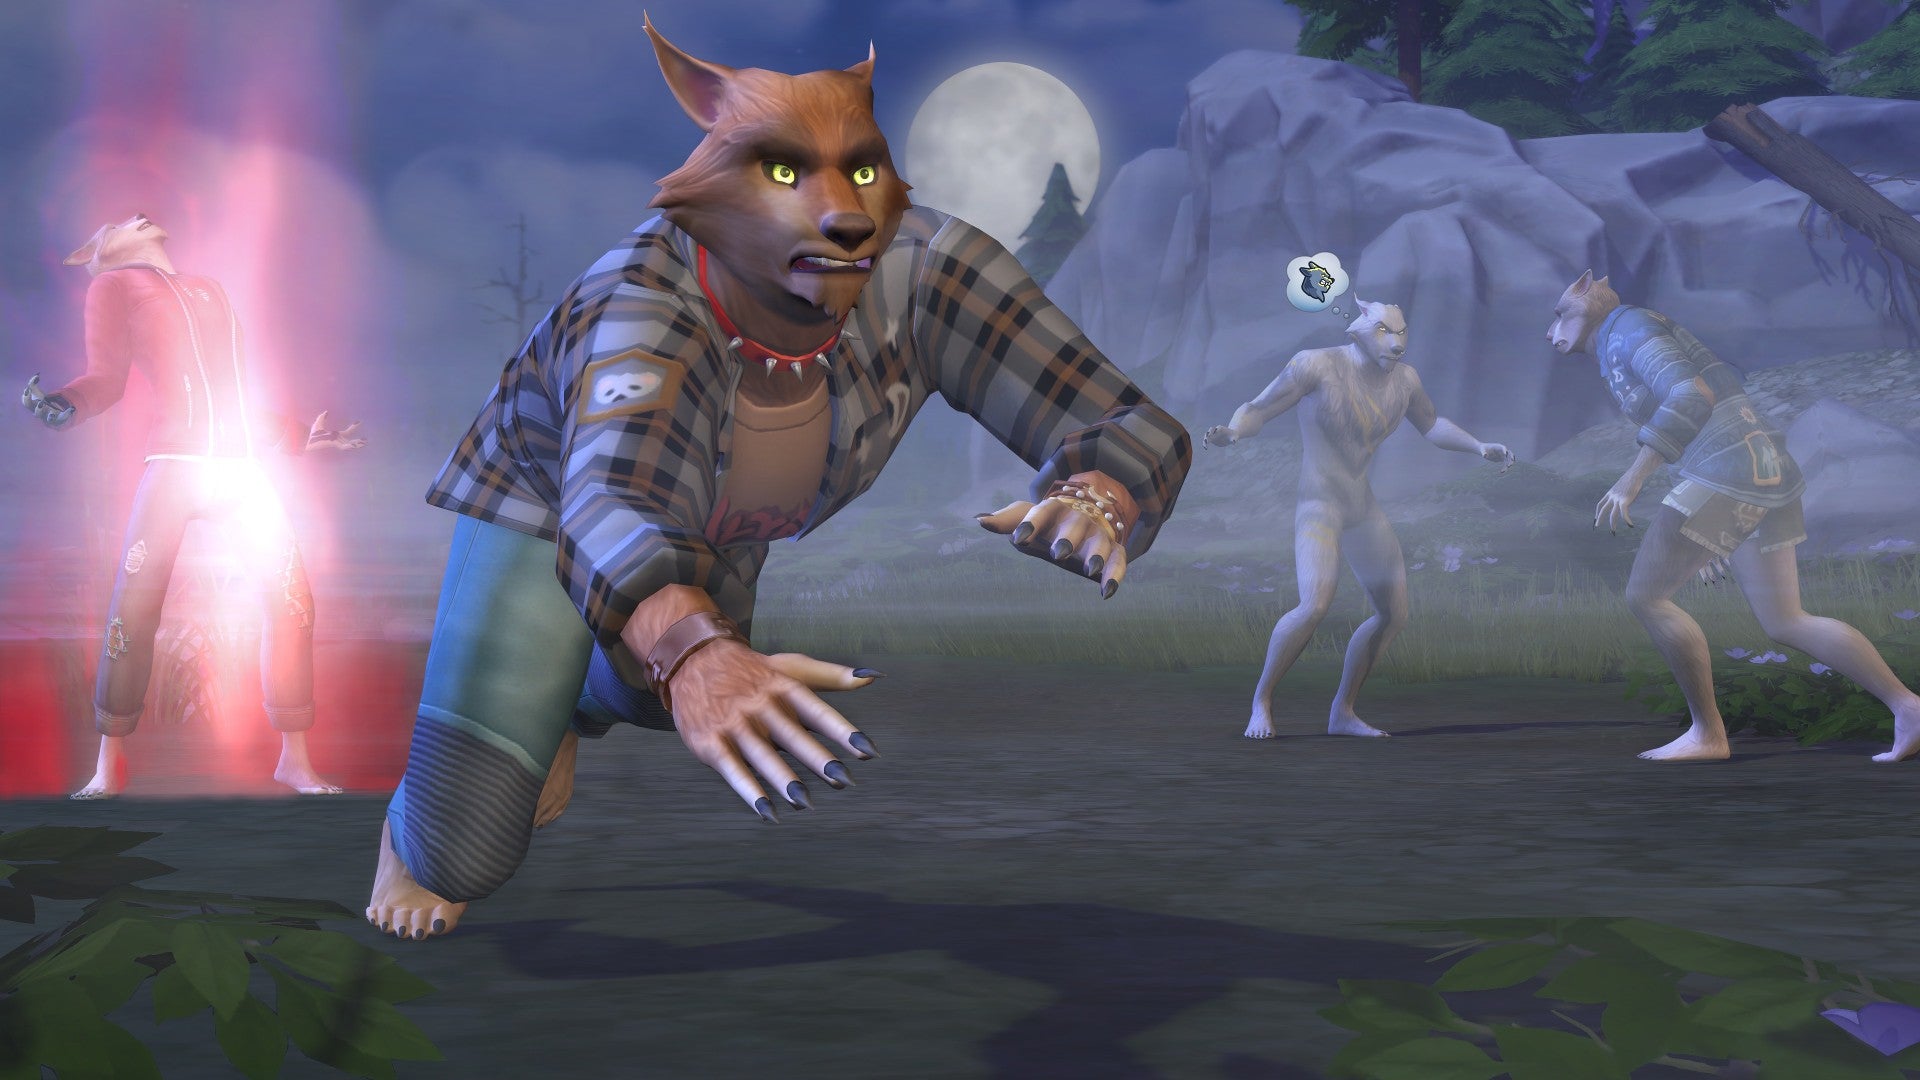 The Sims 4 Werewolves is the best supernatural add-on pack yet